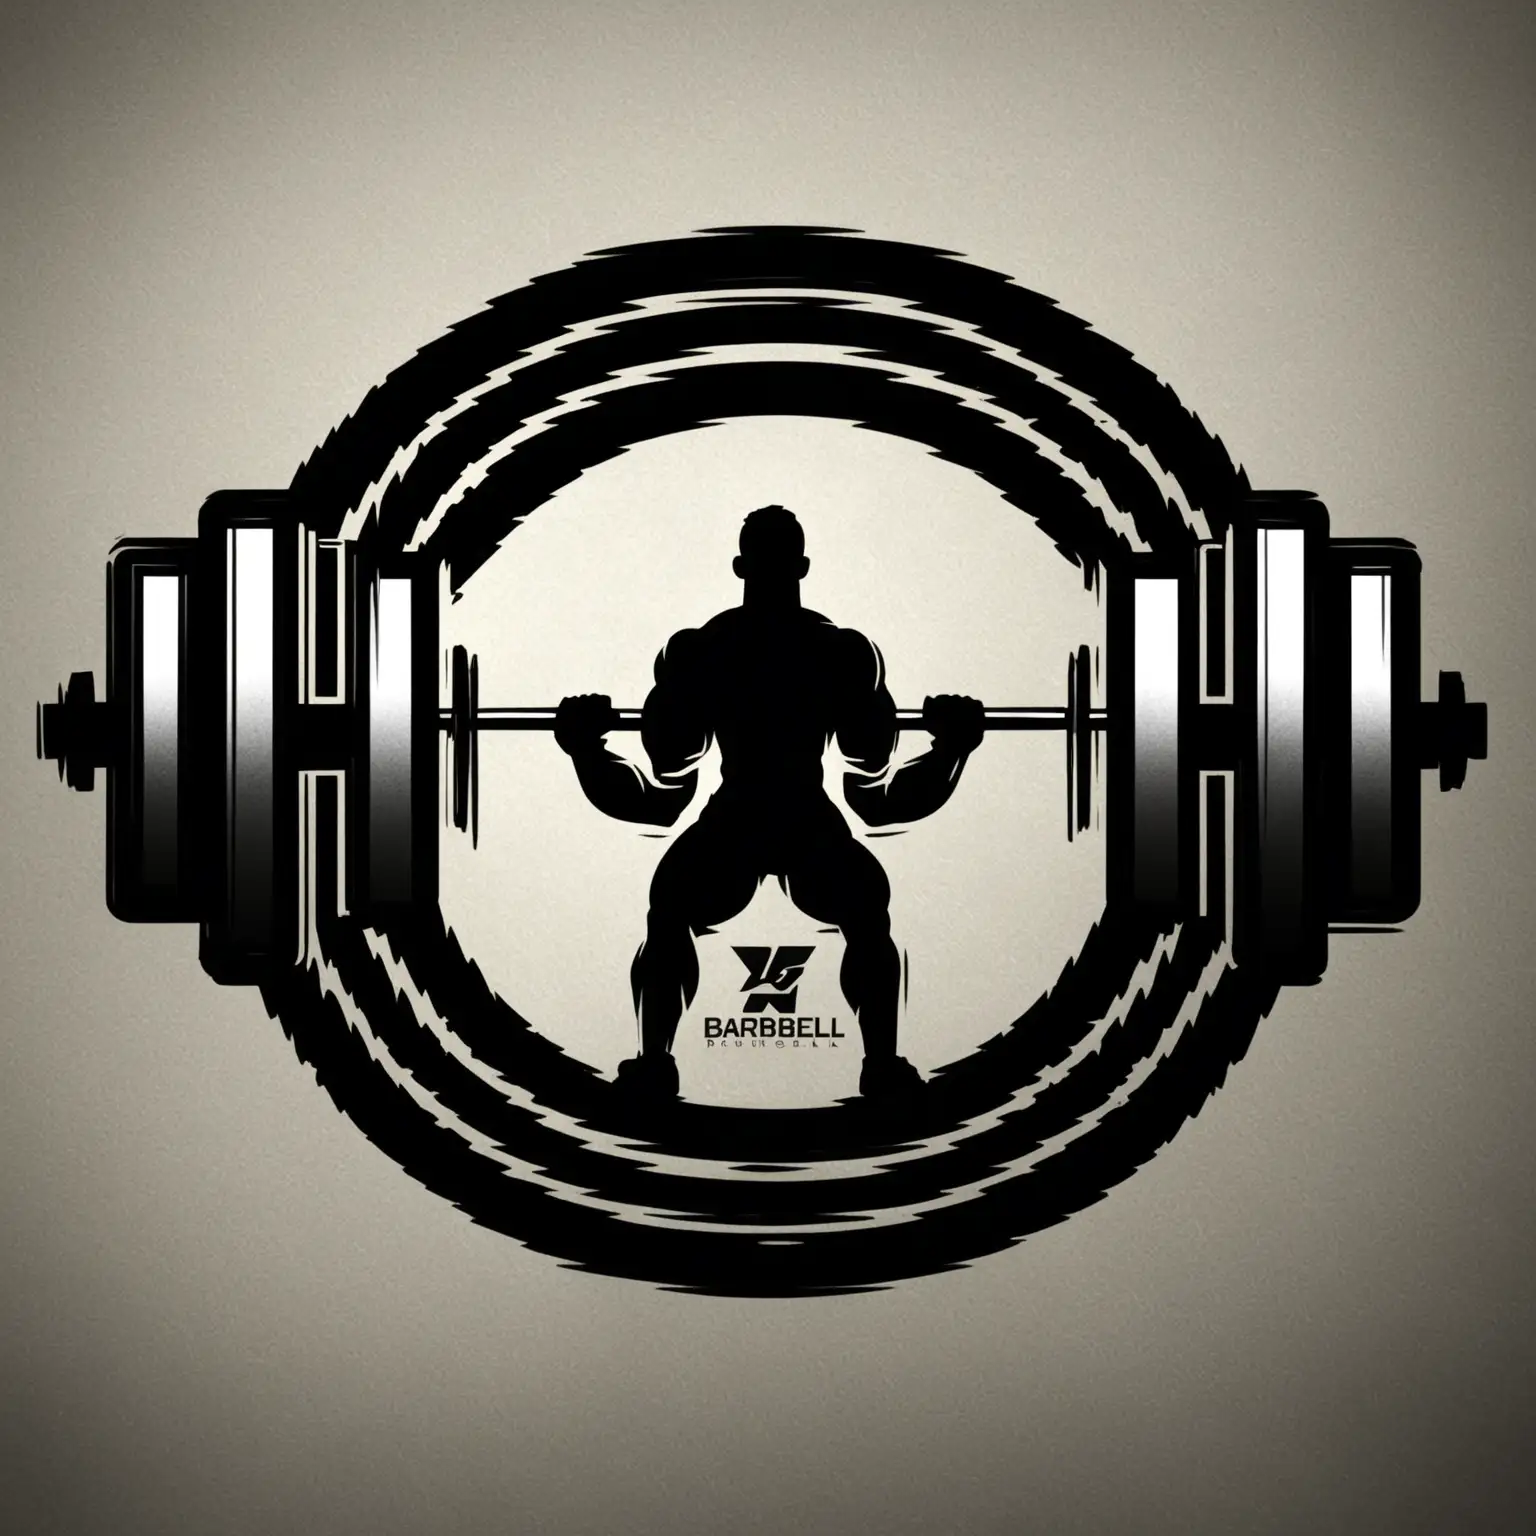 A barbell logo for a fitness professional. Make it appealing for people who are unsure about going to the gym.